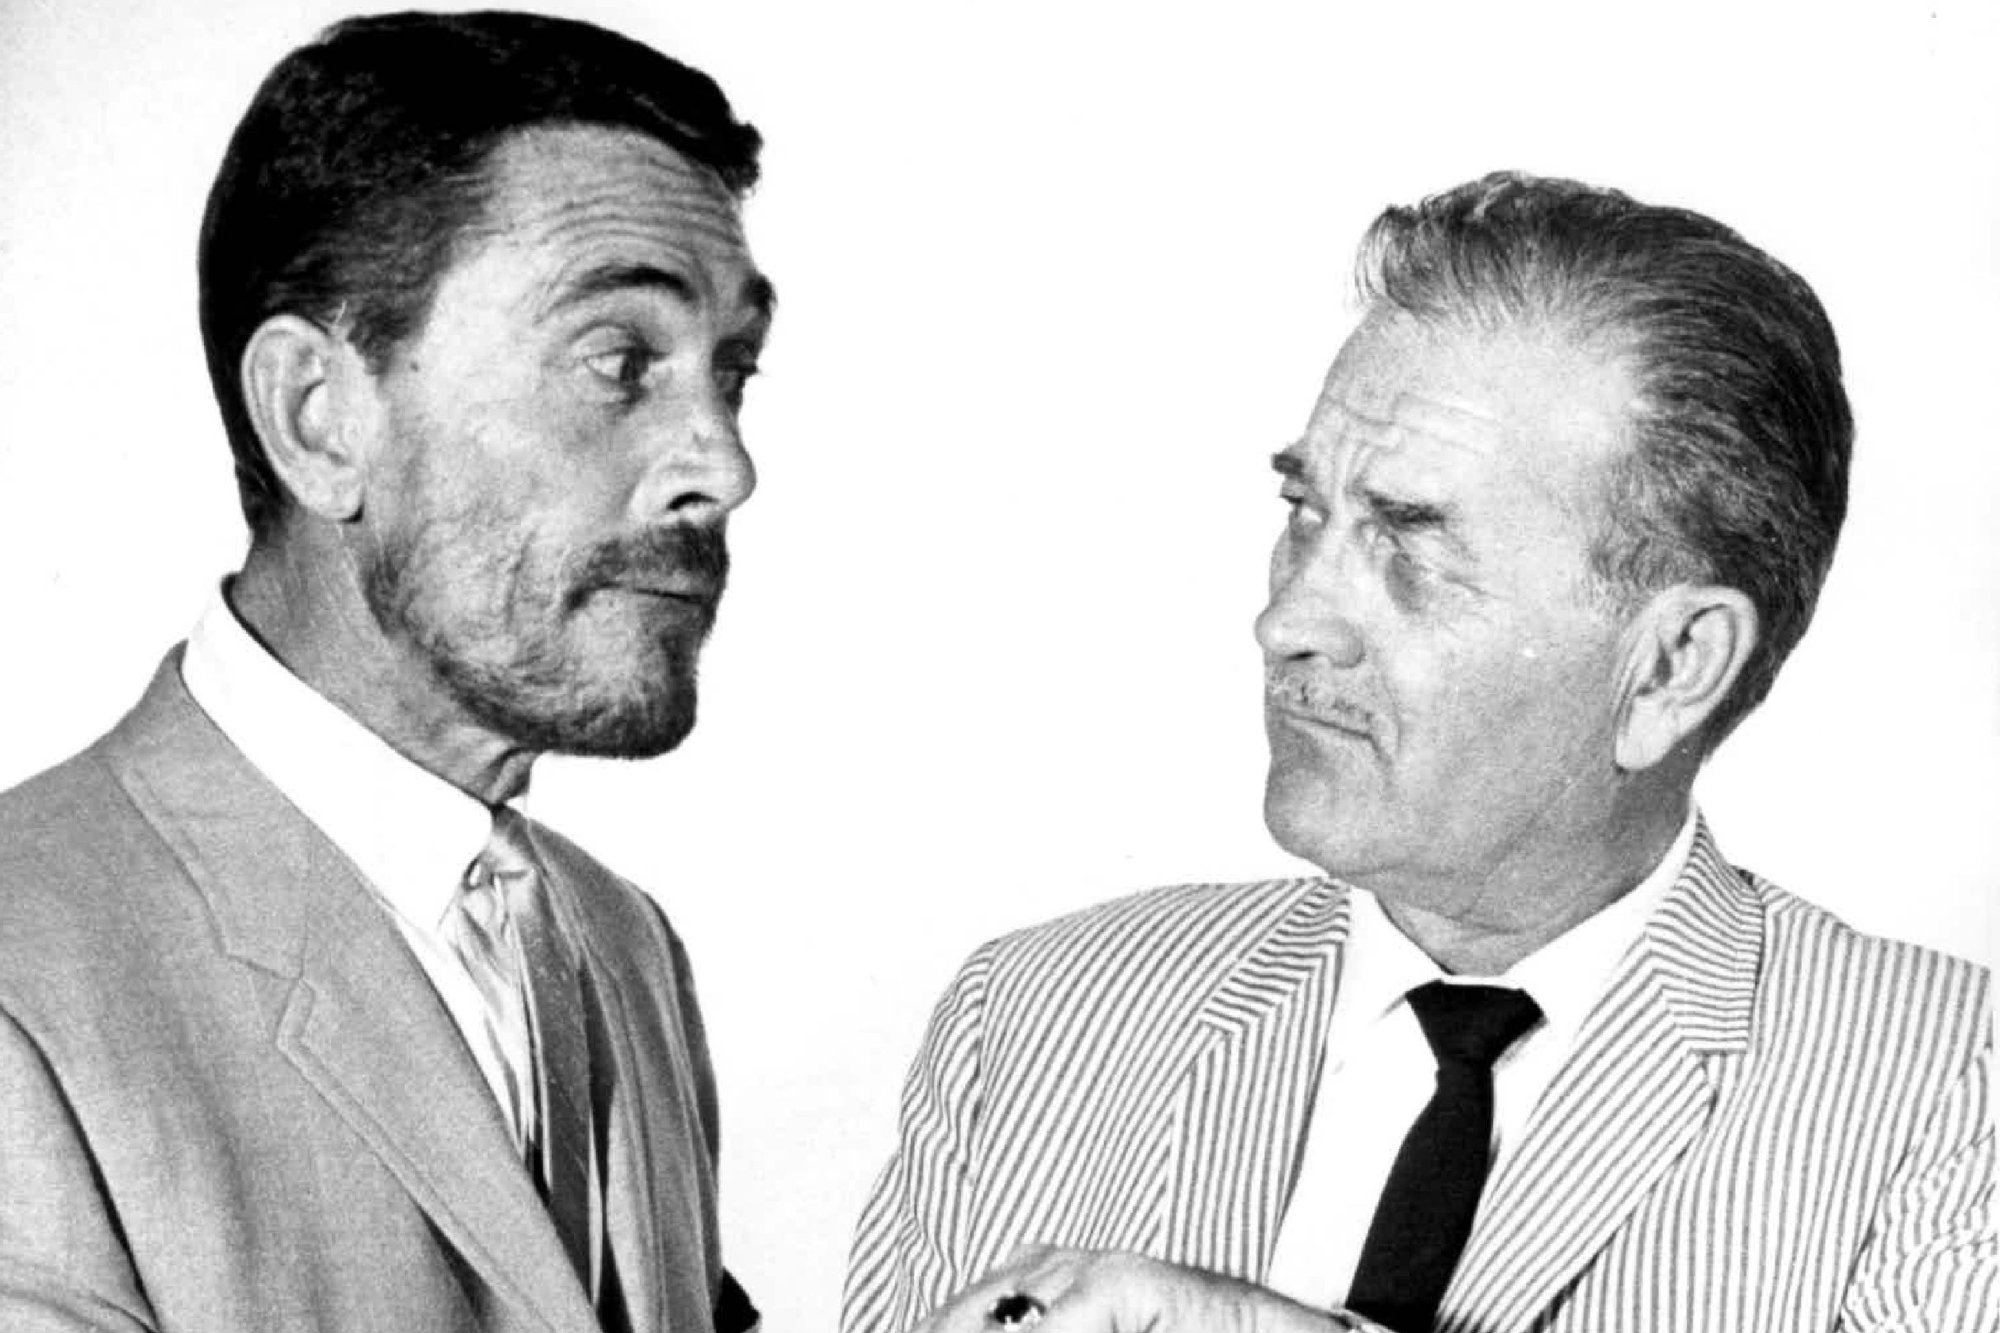 'Gunsmoke' actors Ken Curtis and Milburn Stone in a black-and-white picture giving exaggerated expressions to each other. They're both wearing suits and ties.